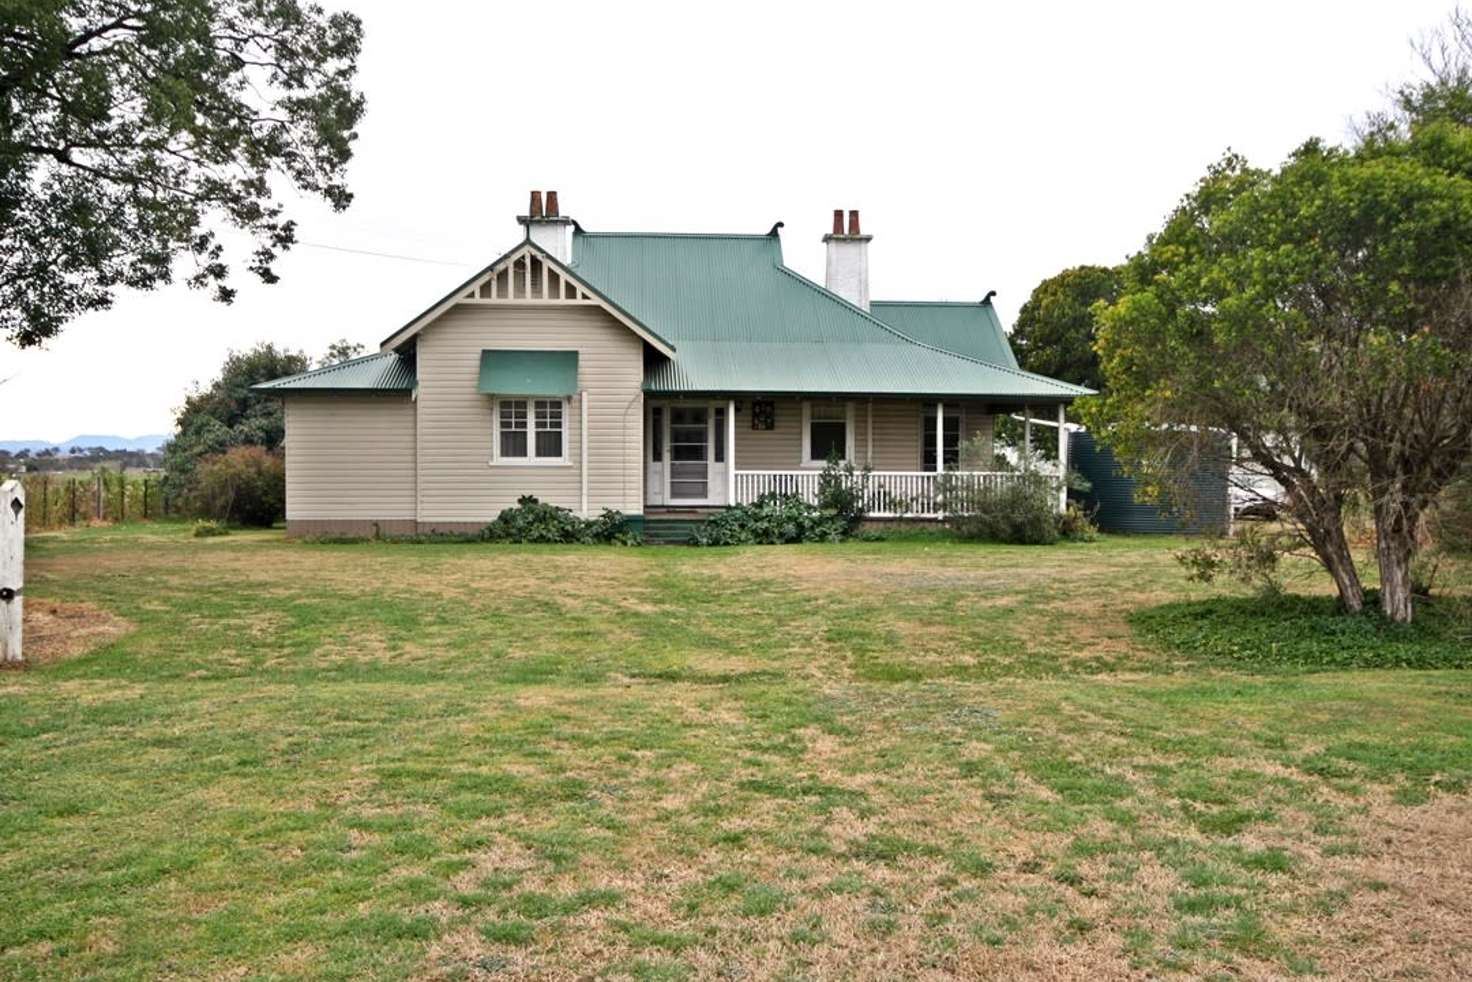 Main view of Homely house listing, 36 Blairmore Lane, Aberdeen NSW 2336